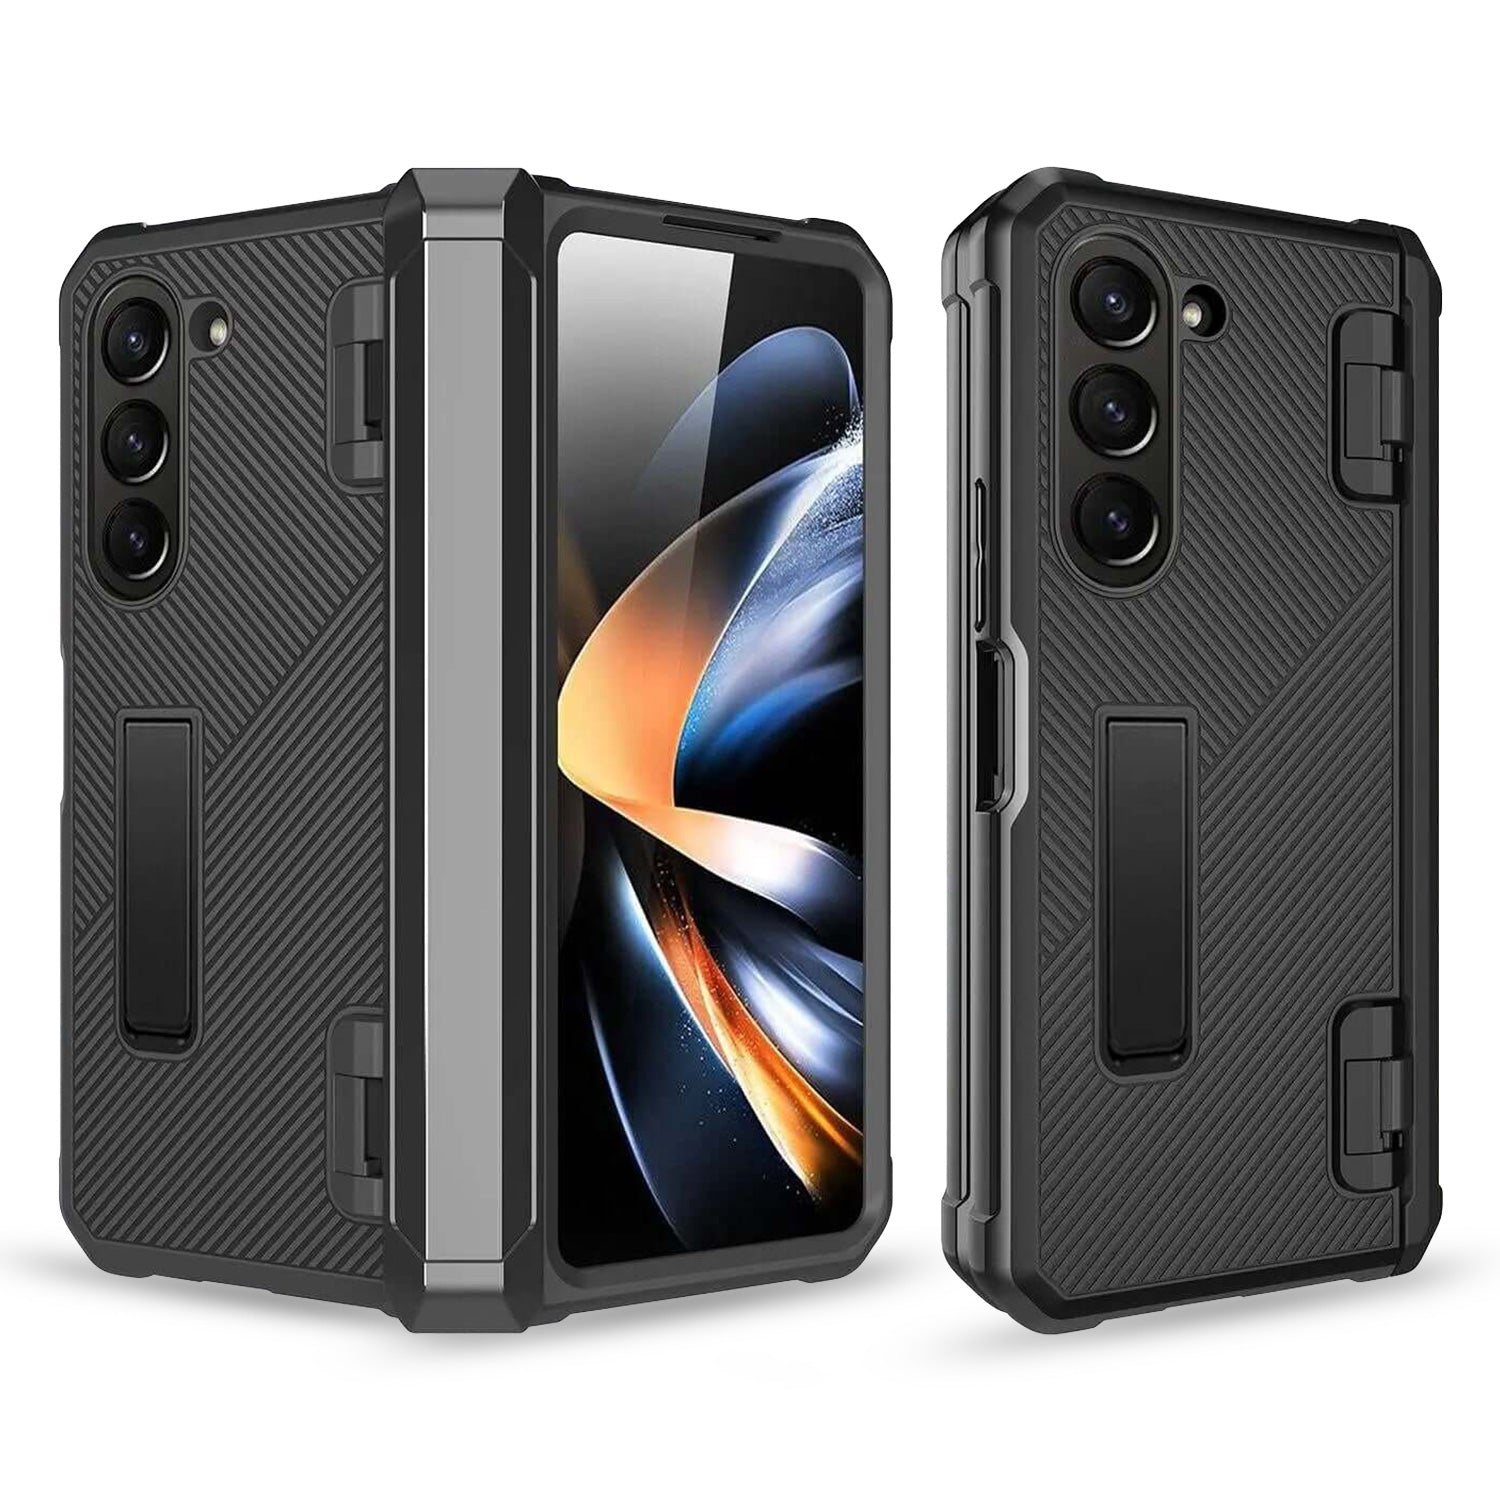 Samsung Galaxy Z Fold5 5G Case Full Body Protection with Screen Protector & Kickstand